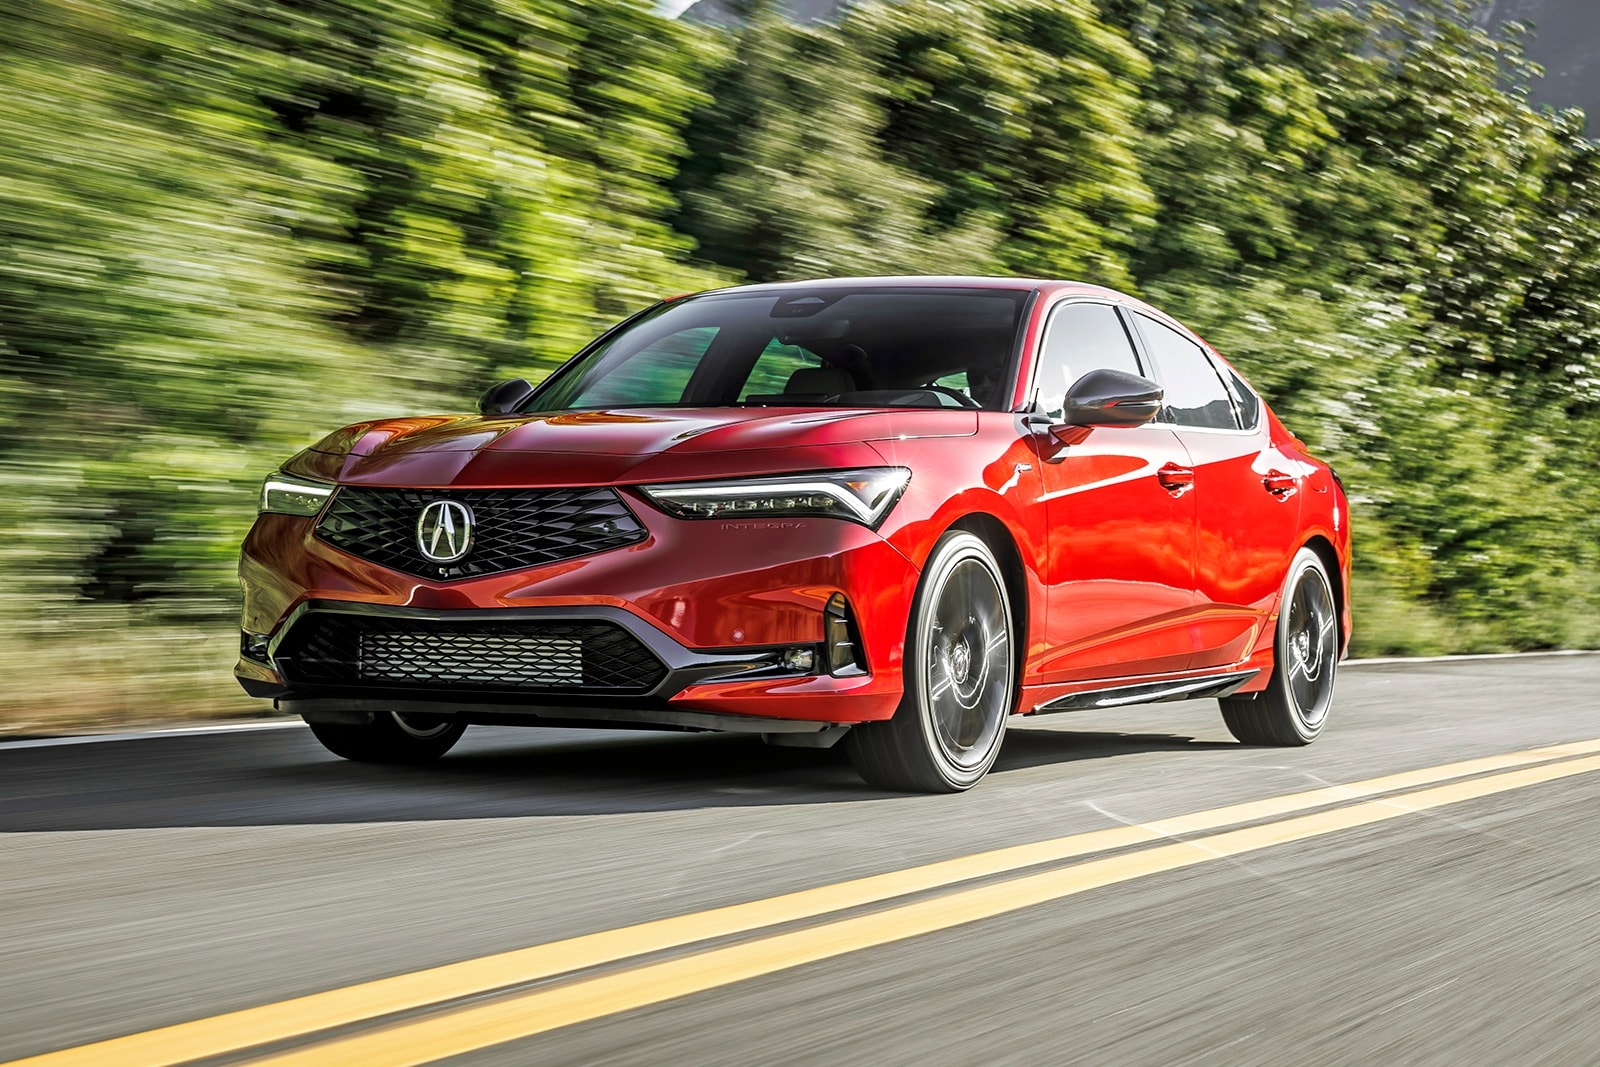 2023 Acura Integra First Drive: Can It Capture the Magic of the